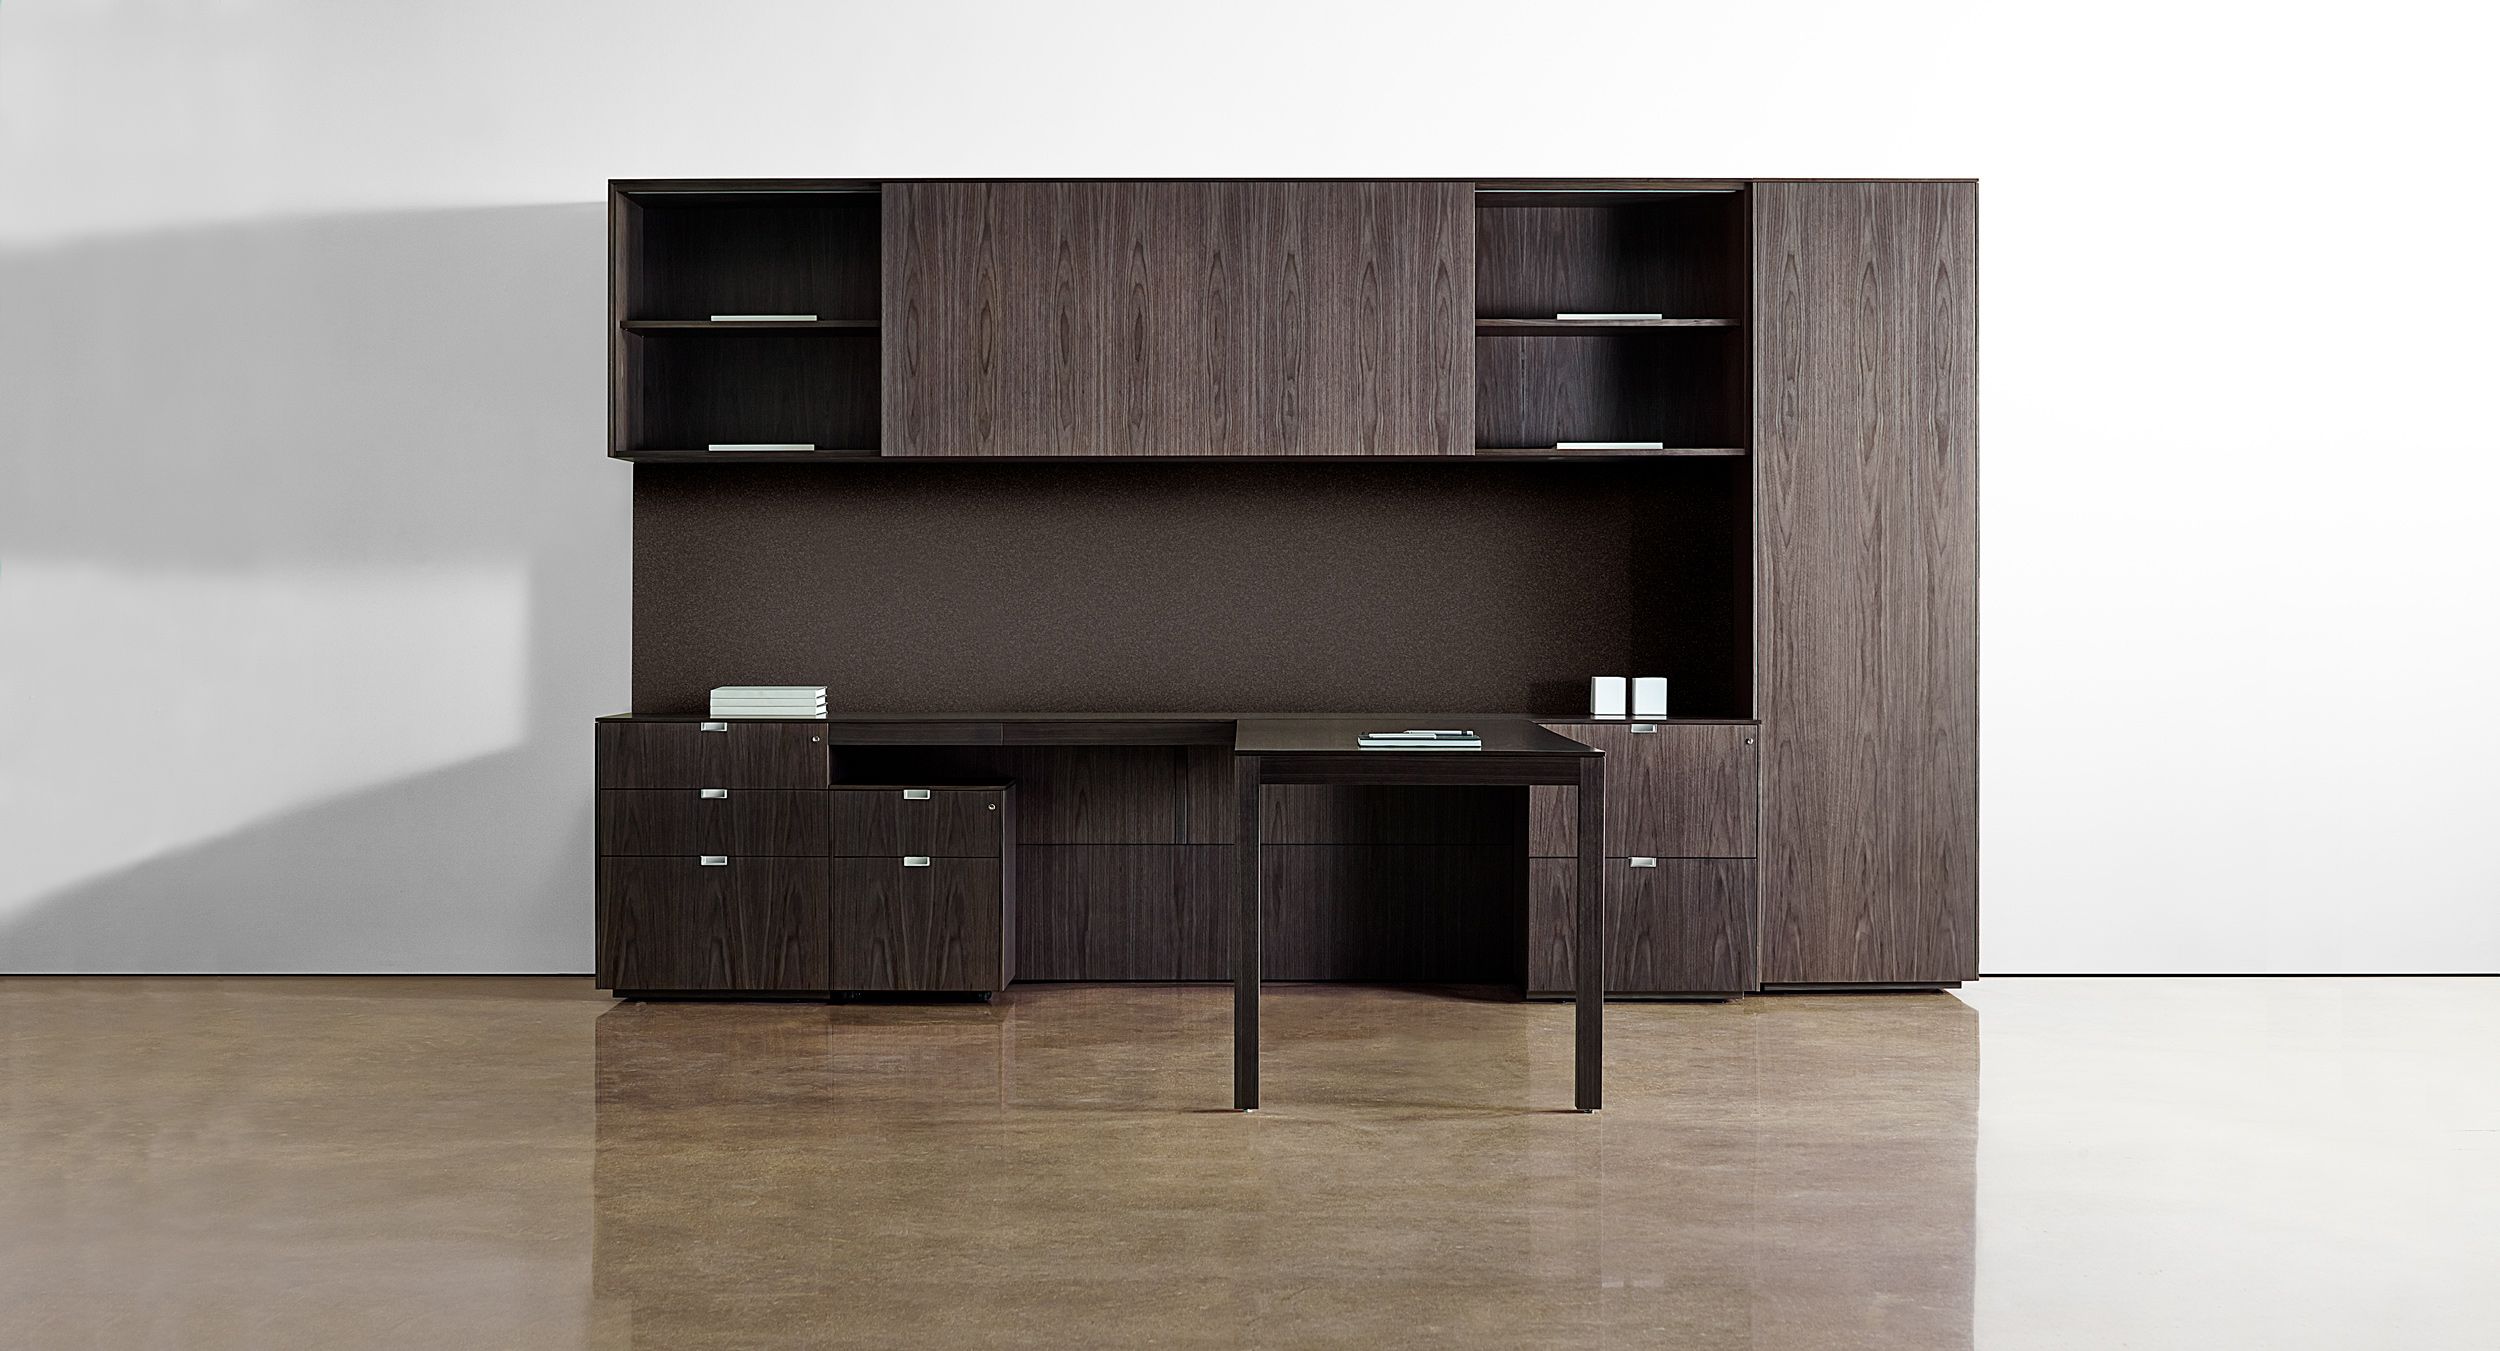 Casework is available in multiple sizes and configurations to precisely meet your work and storage needs.